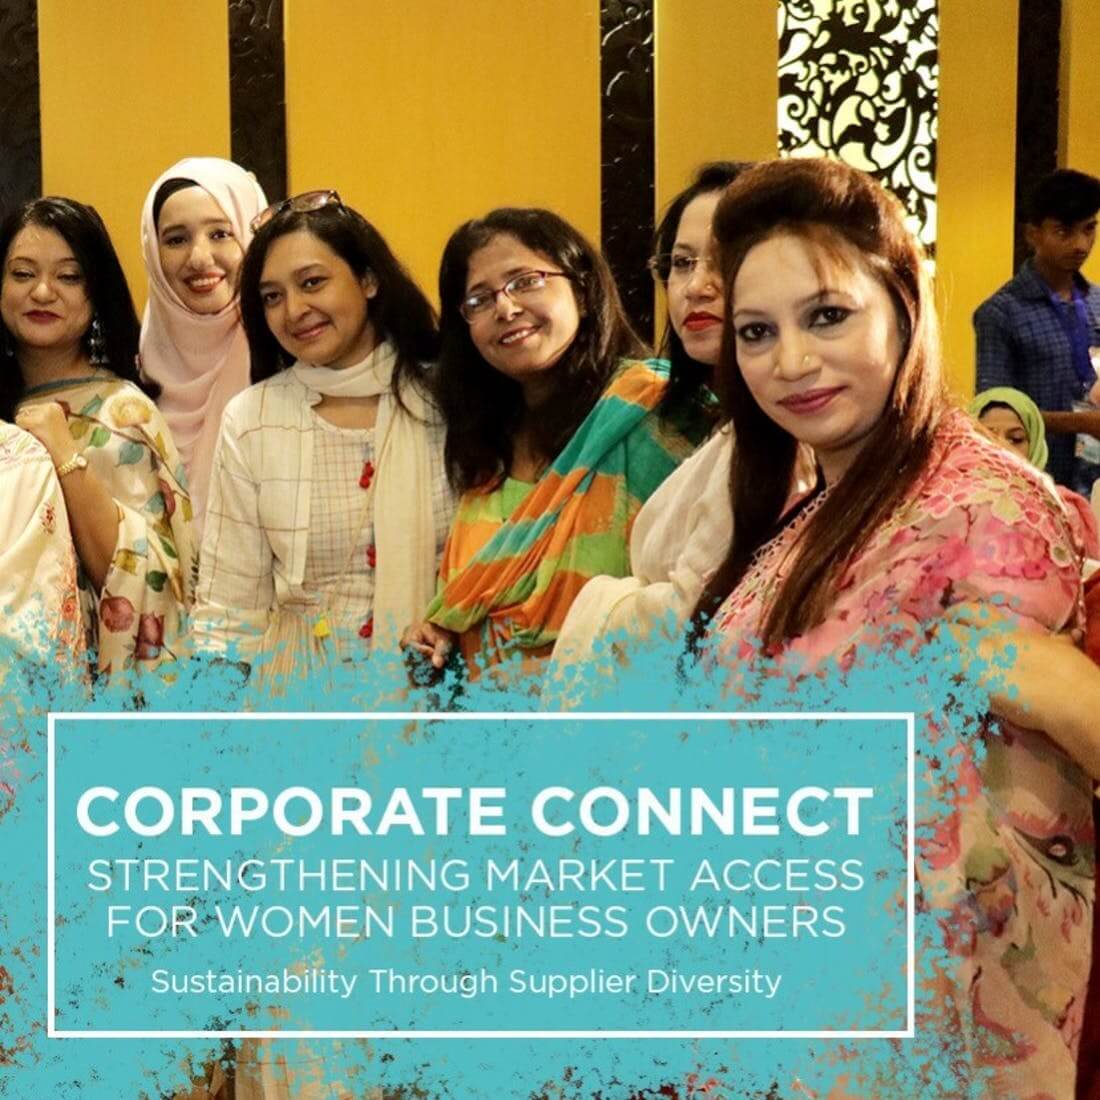 NEW BUSINESS OPPORTUNITY FOR WOMEN-OWNED BUSINESSES IN BANGLADESH